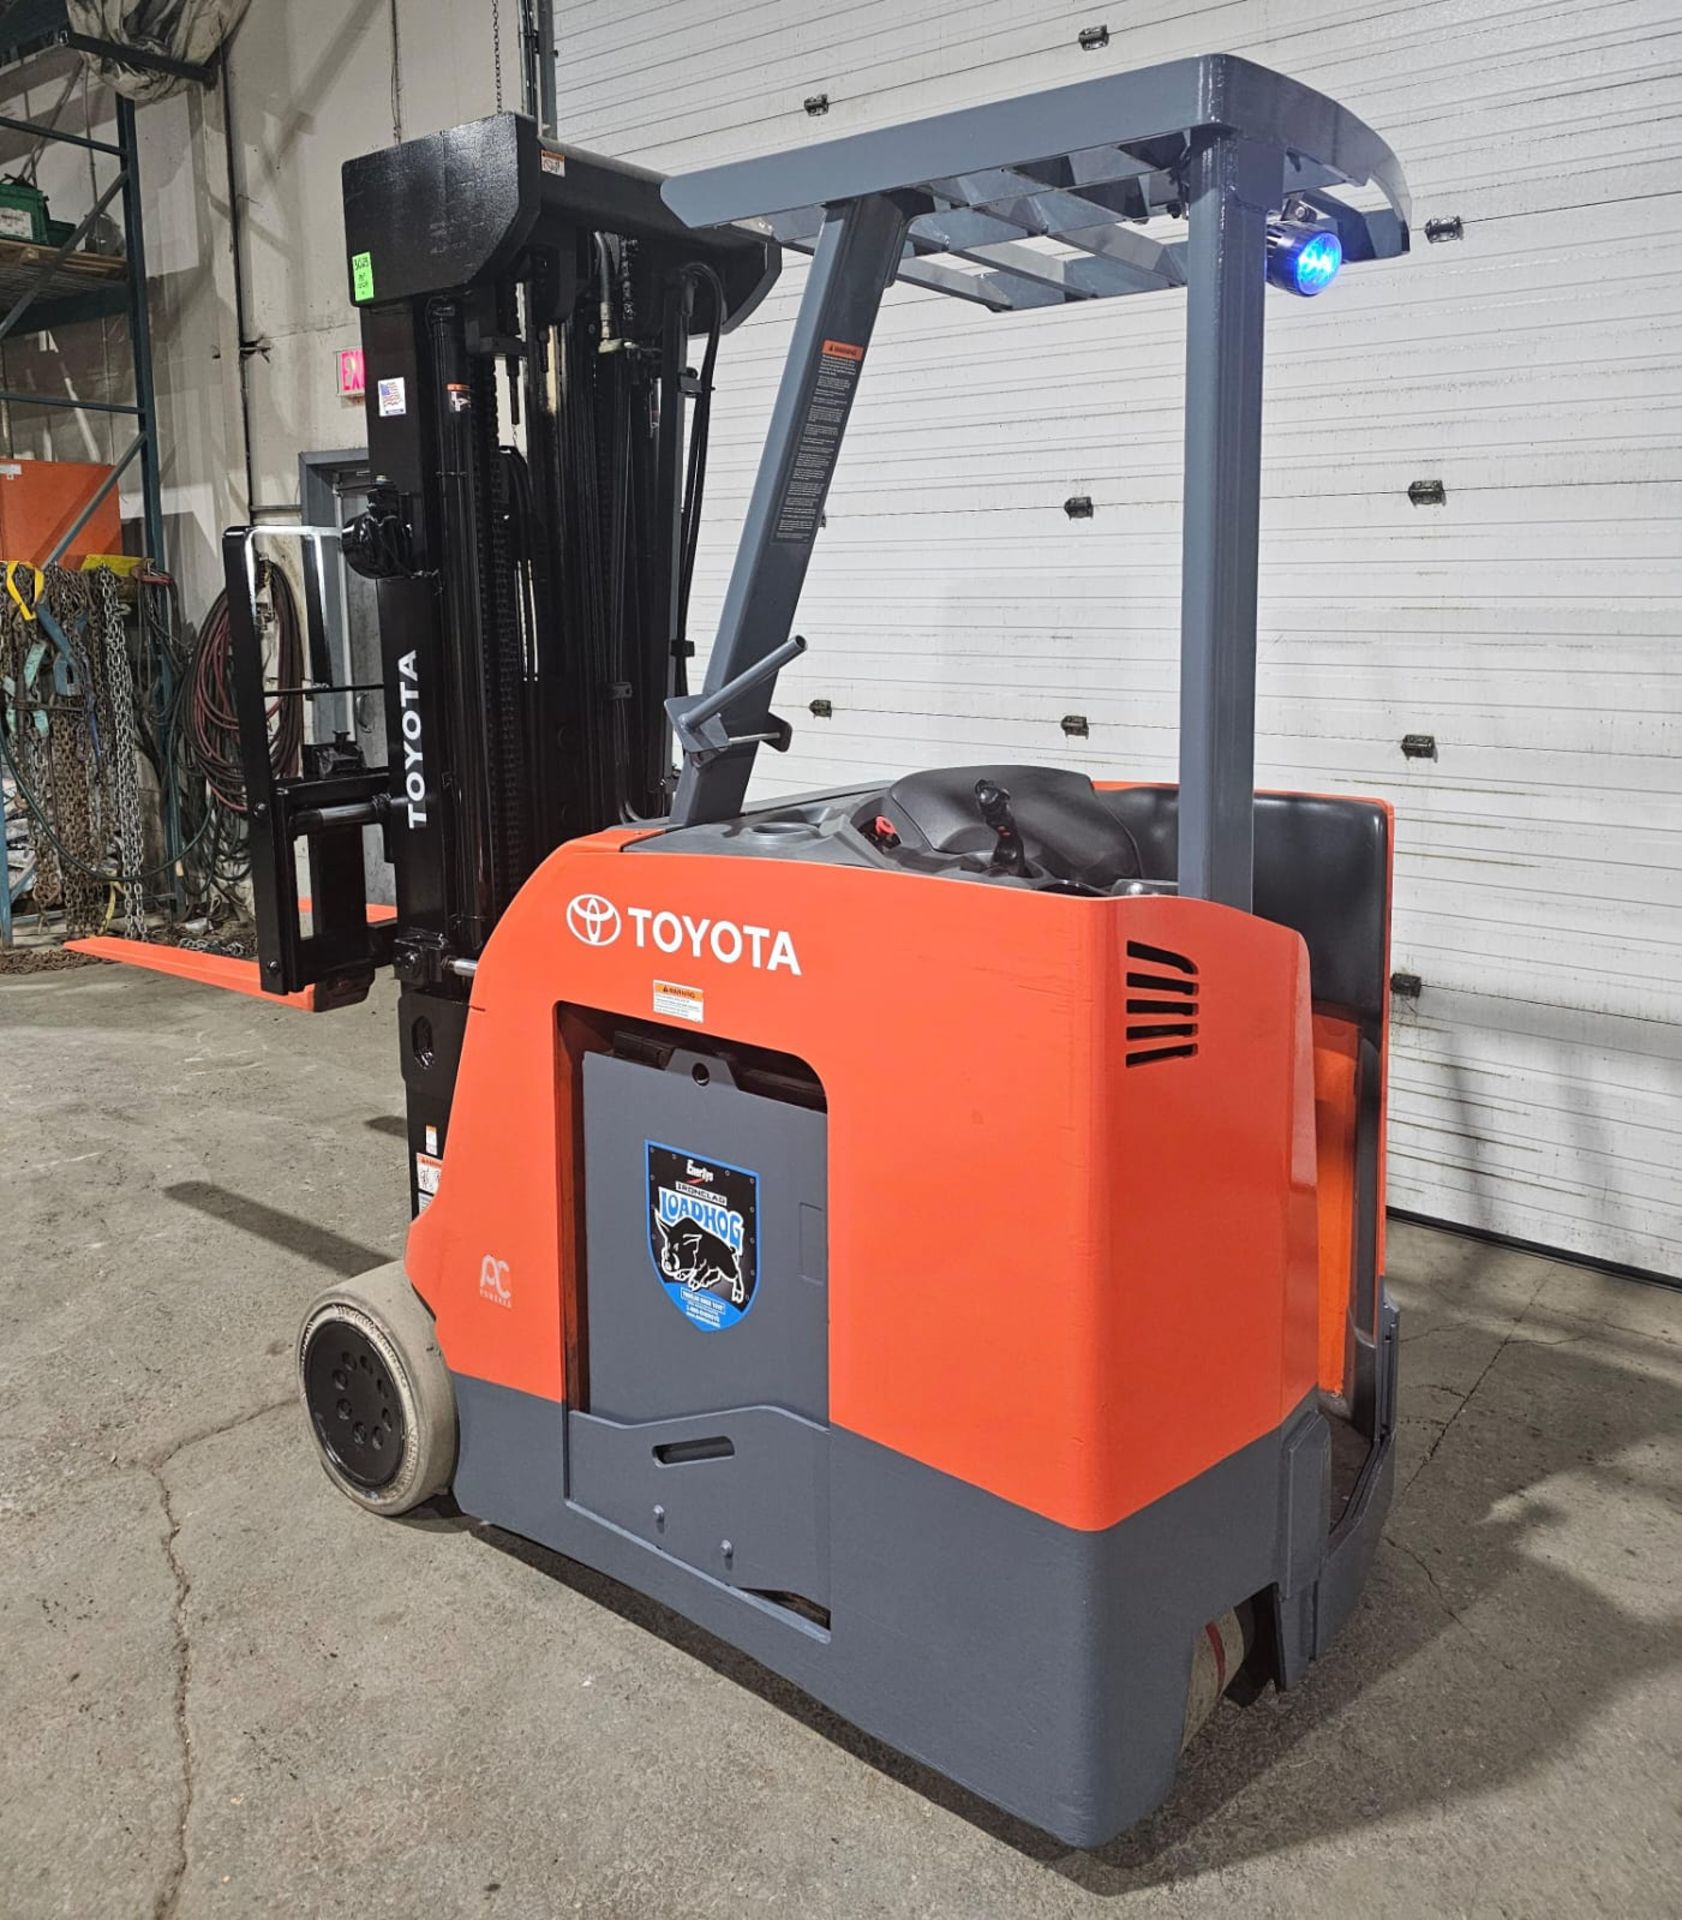 2017 Toyota 4,000lbs Capacity Stand On Electric Forklift with 4-STAGE Mast, sideshift, 36V Battery - Image 2 of 7